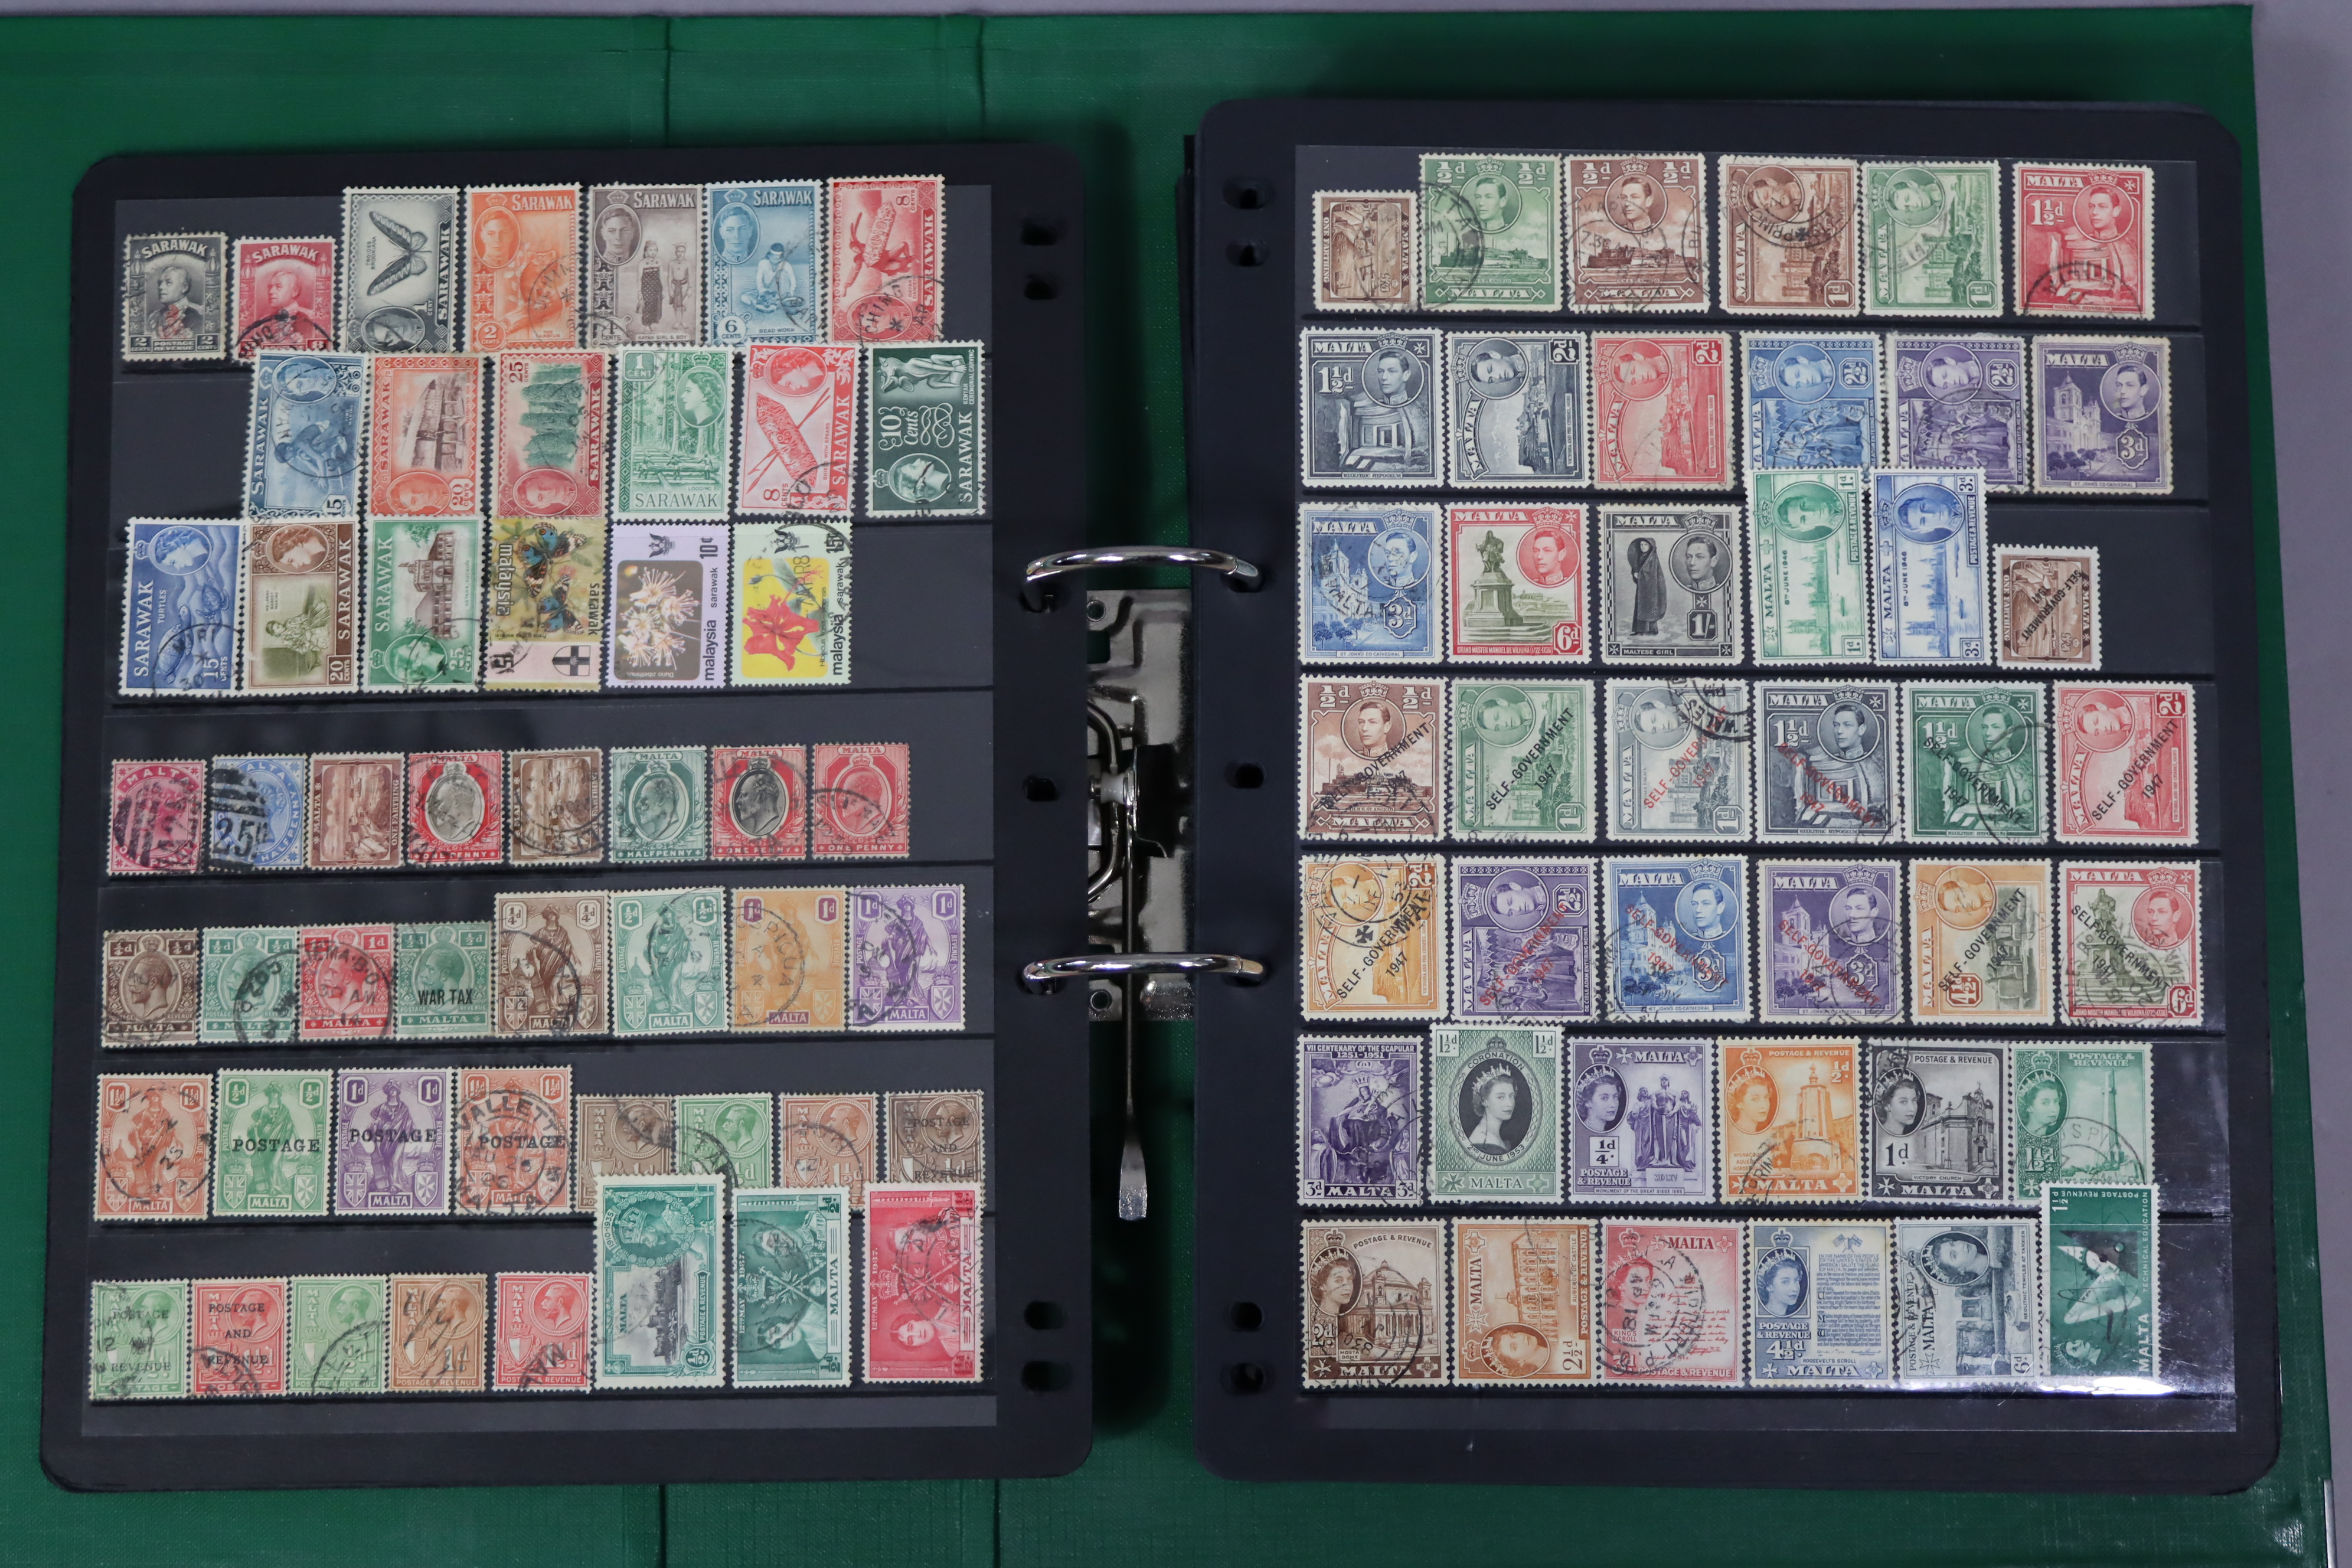 A collection of GB commonwealth & world stamps on stock leaves, in a ring-binder album.